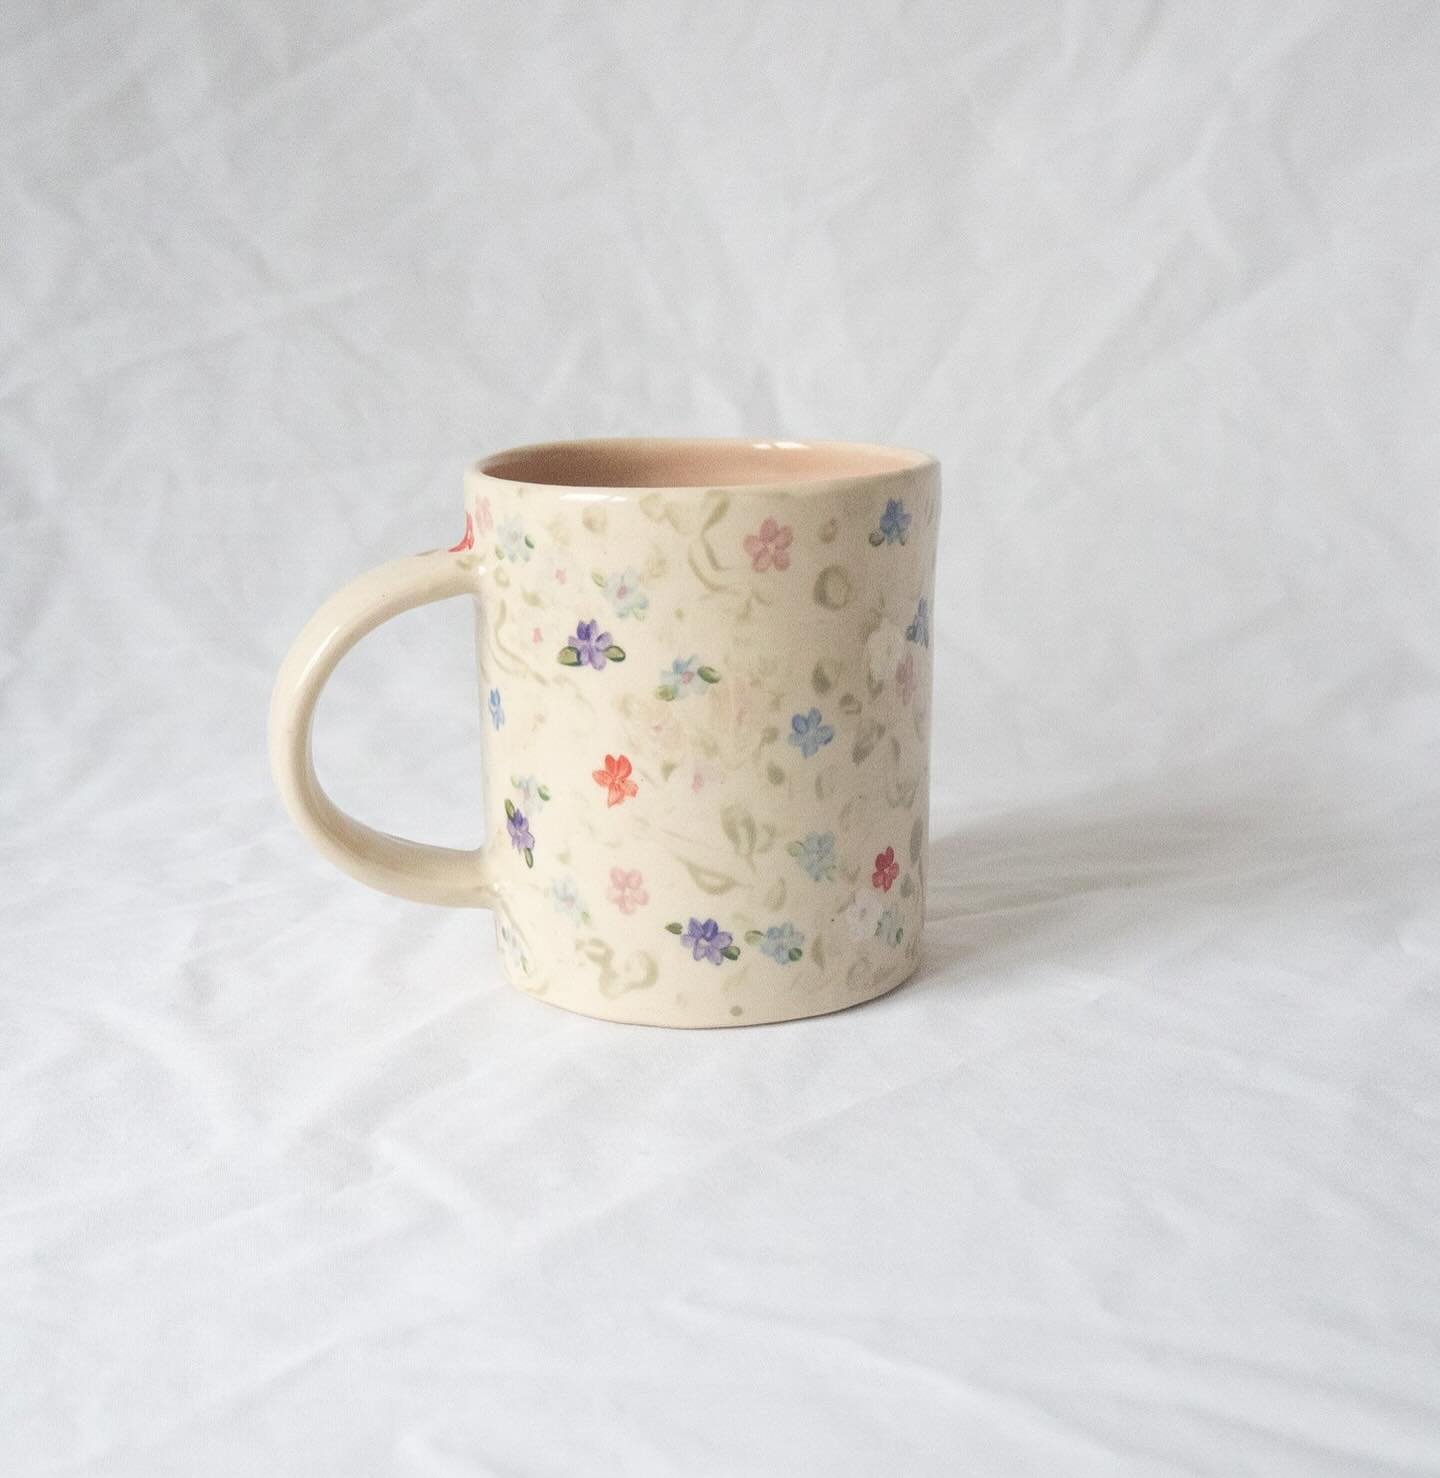 Watching flowers bloom, thinking up mugs for your cabinet collection